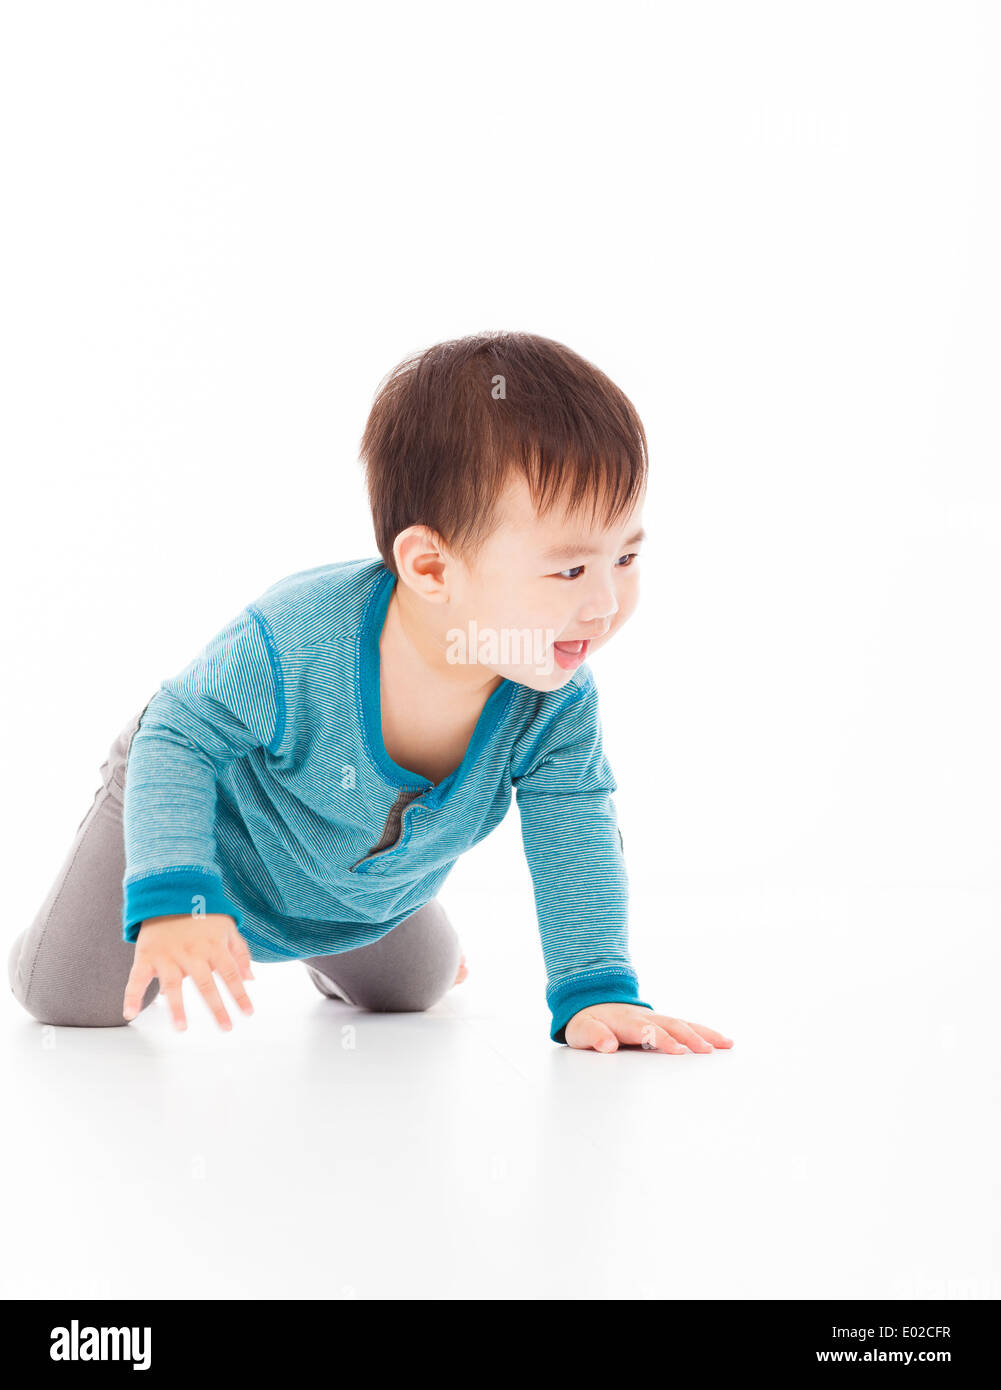 cute baby boy is crawling on floor Stock Photo